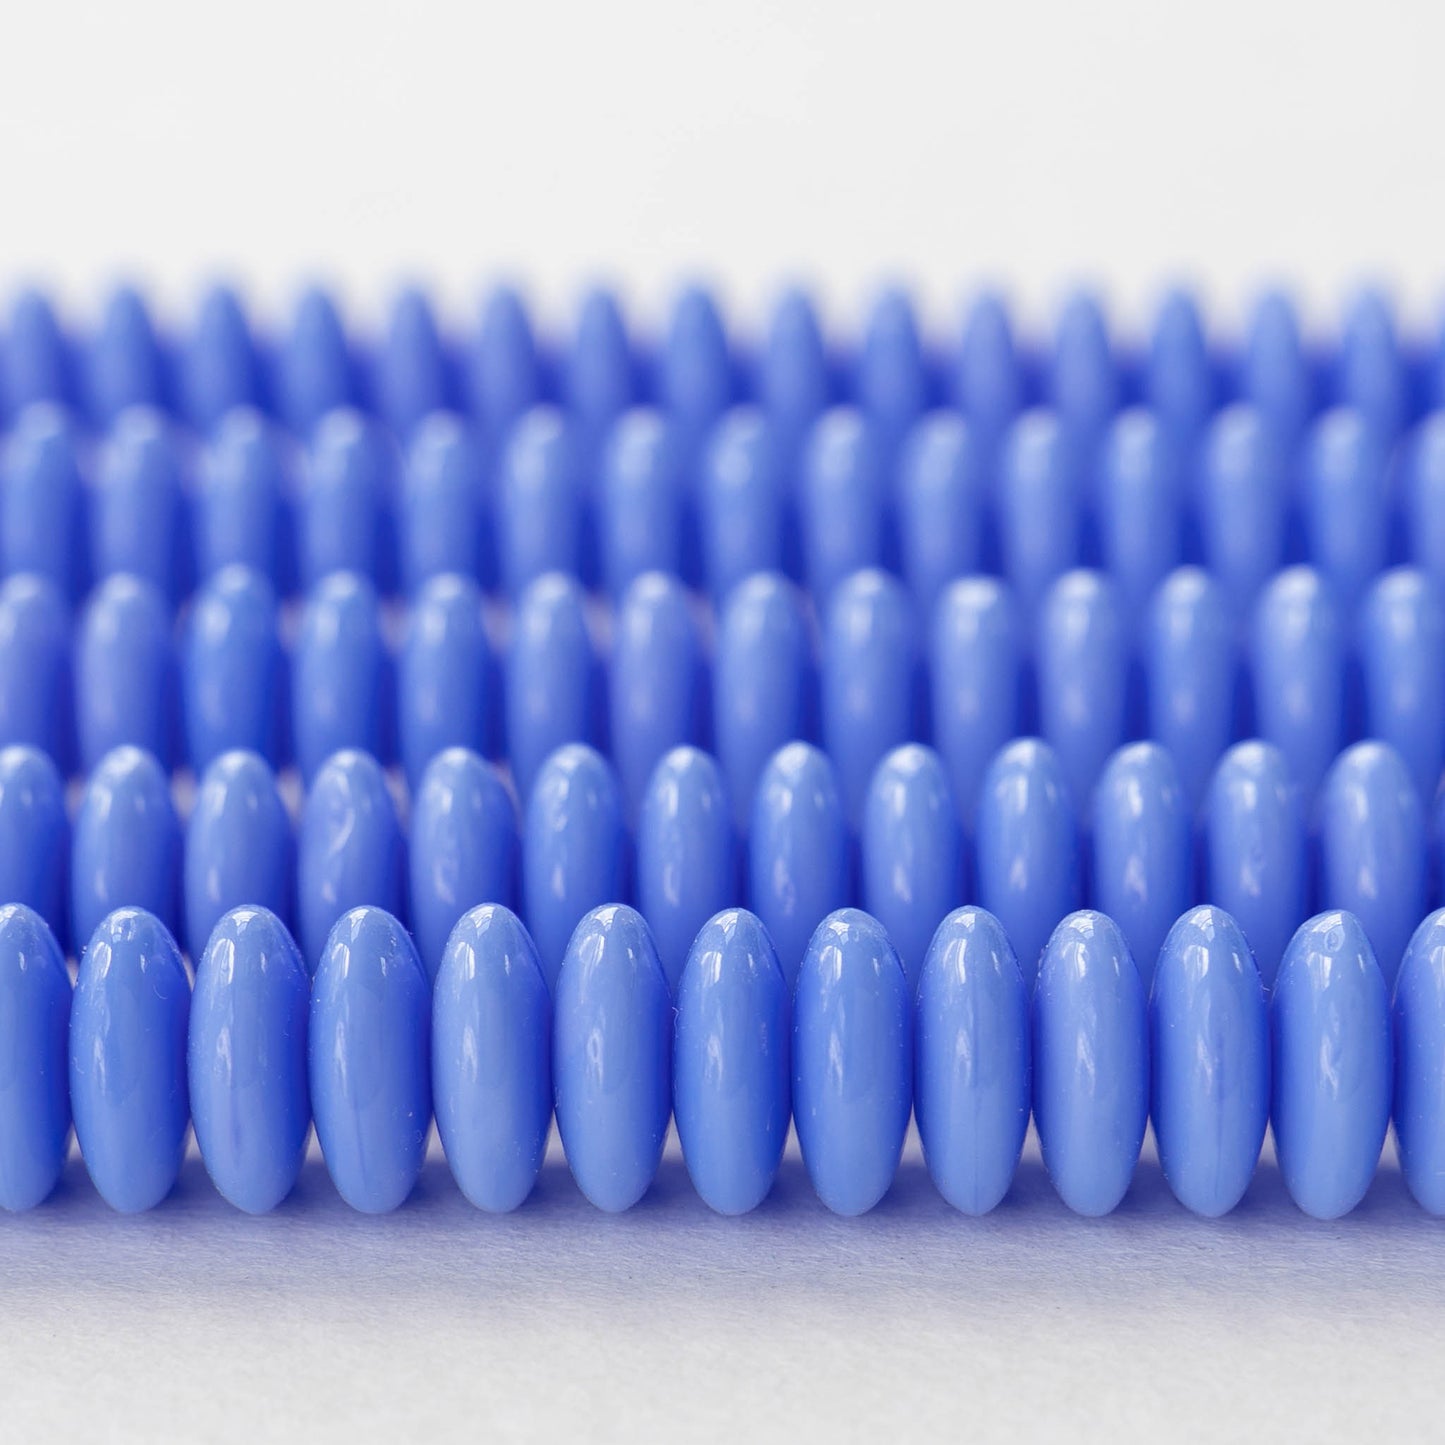 Load image into Gallery viewer, 10mm Rondelle Beads - Opaque Periwinkle Blue - 30 Beads
